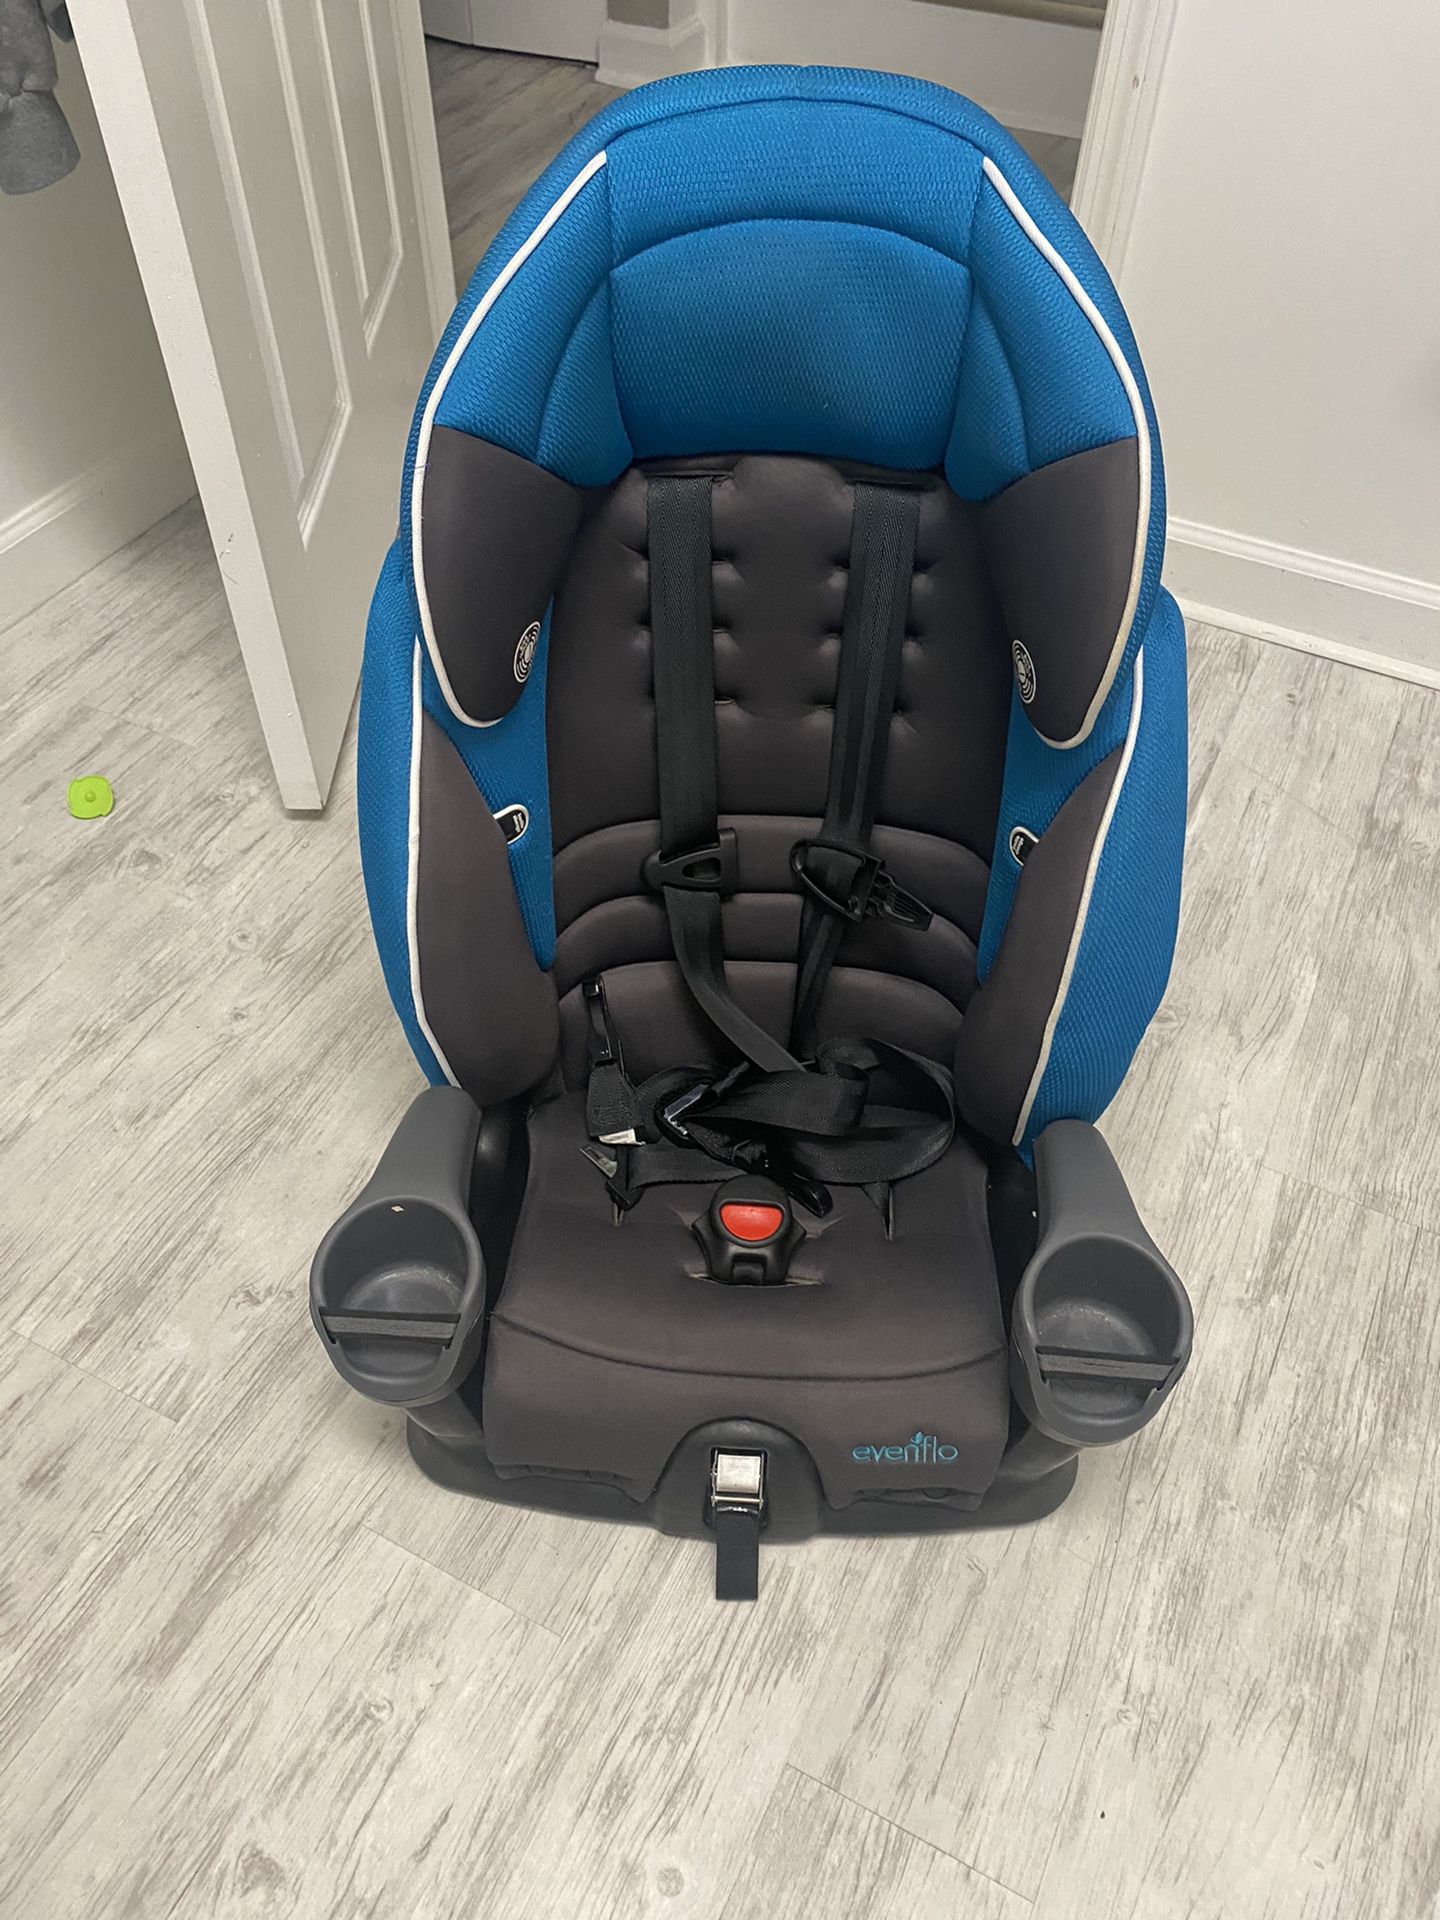 Evenflo Car Seat and booster